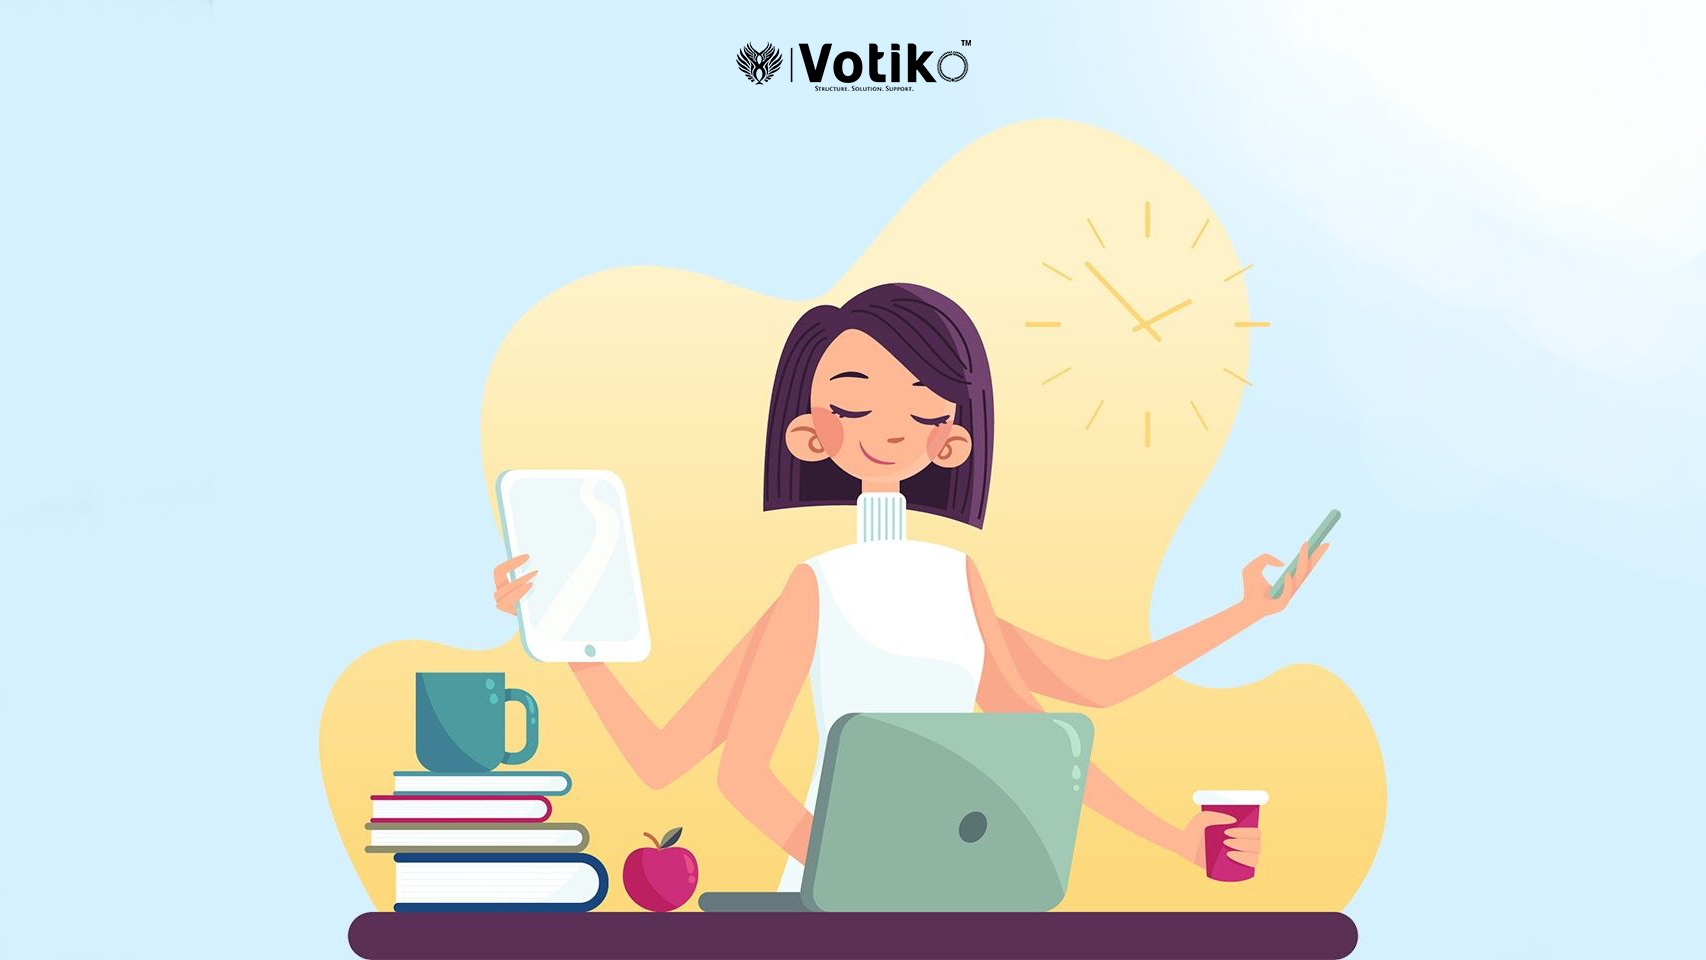 The Top Reasons to Hire Votiko’s Virtual Assistant